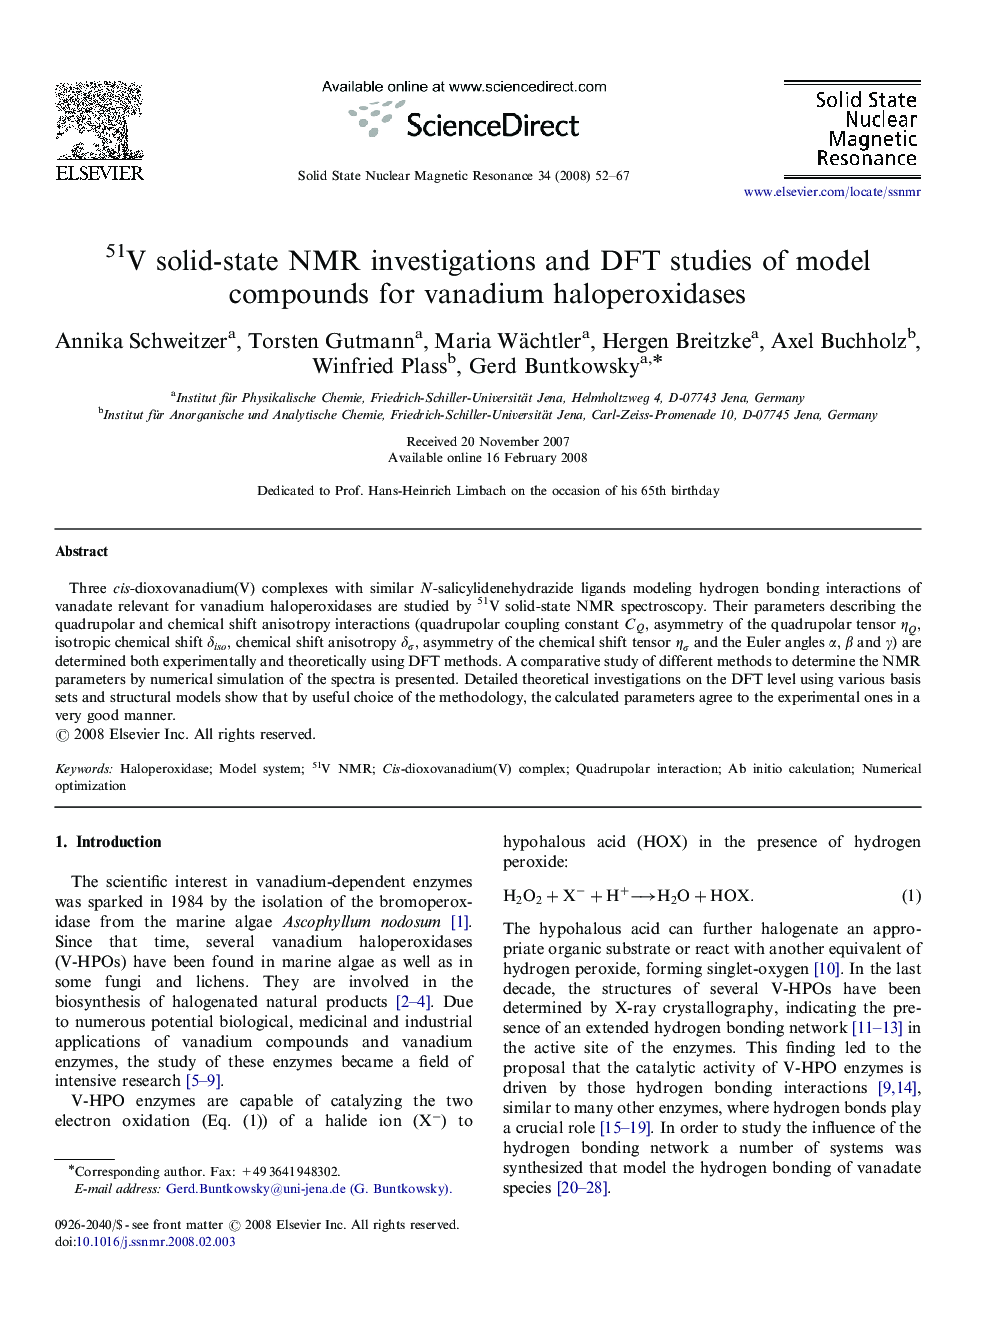 51V solid-state NMR investigations and DFT studies of model compounds for vanadium haloperoxidases